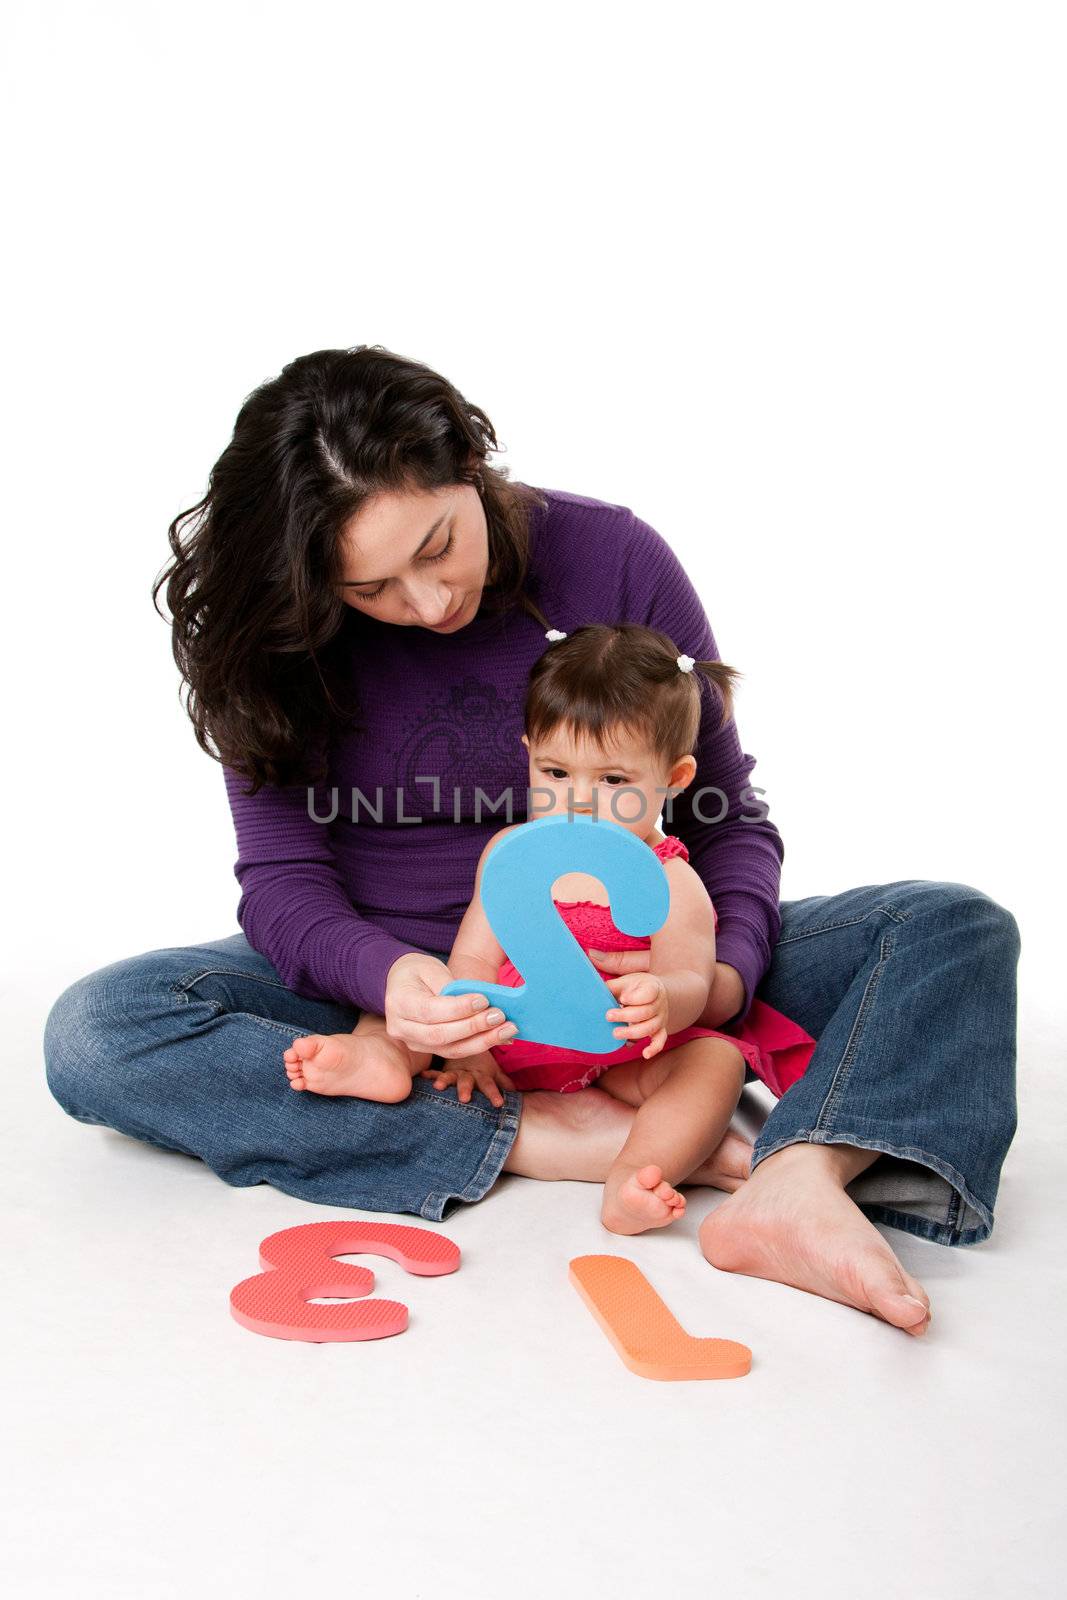 Mother, nanny, or teacher teaching baby to learn how to count one, two, three, with numbers in a playful way, while sitting on floor.